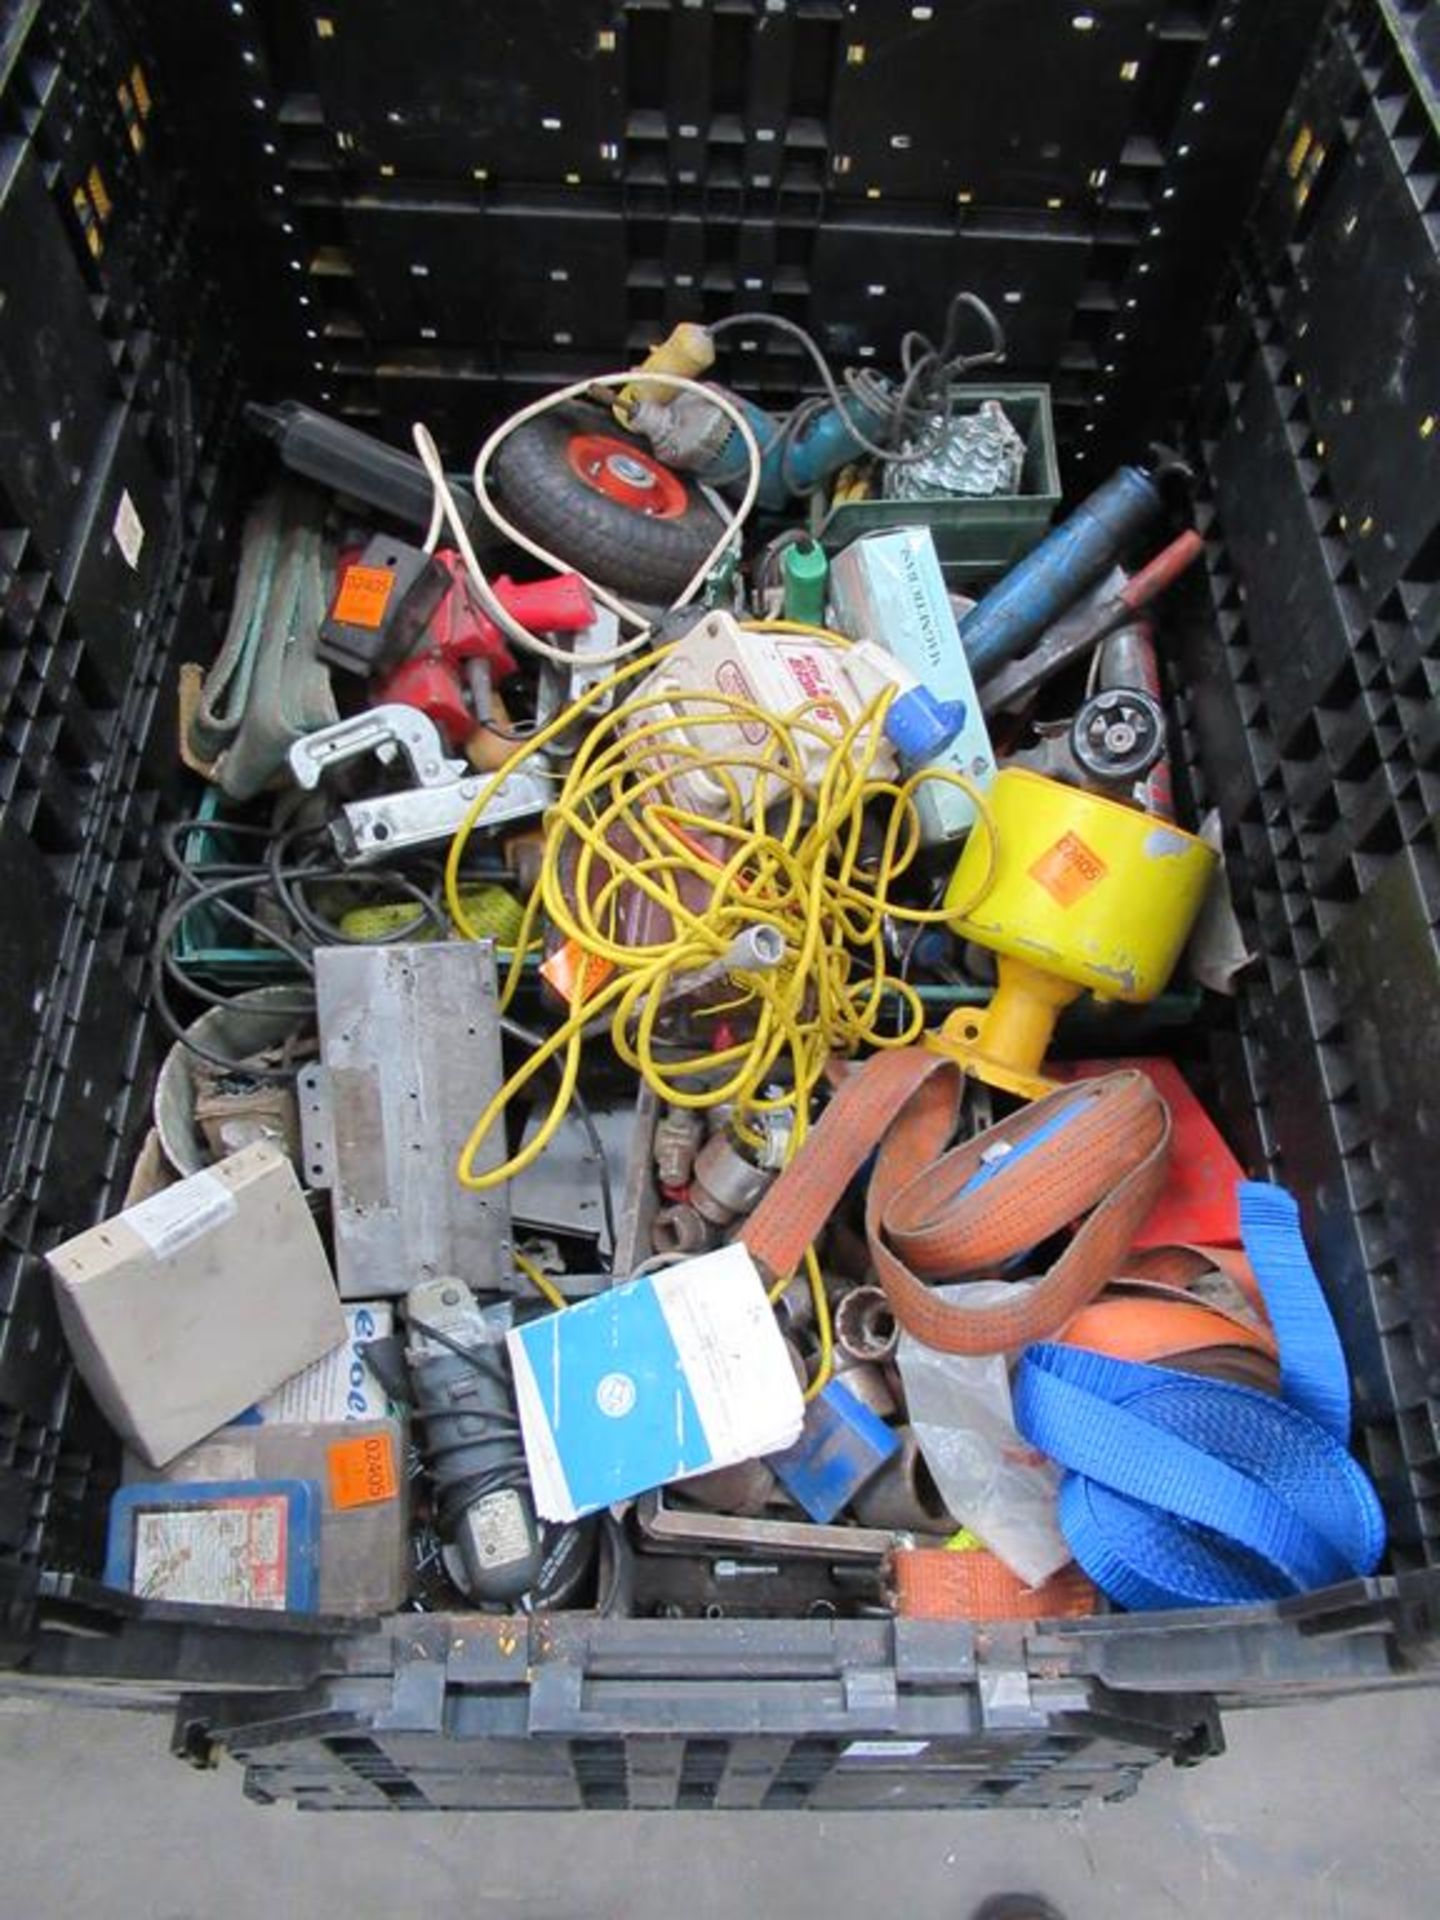 Stillage to contain various slings, ratchet straps, power tools etc - Image 2 of 2